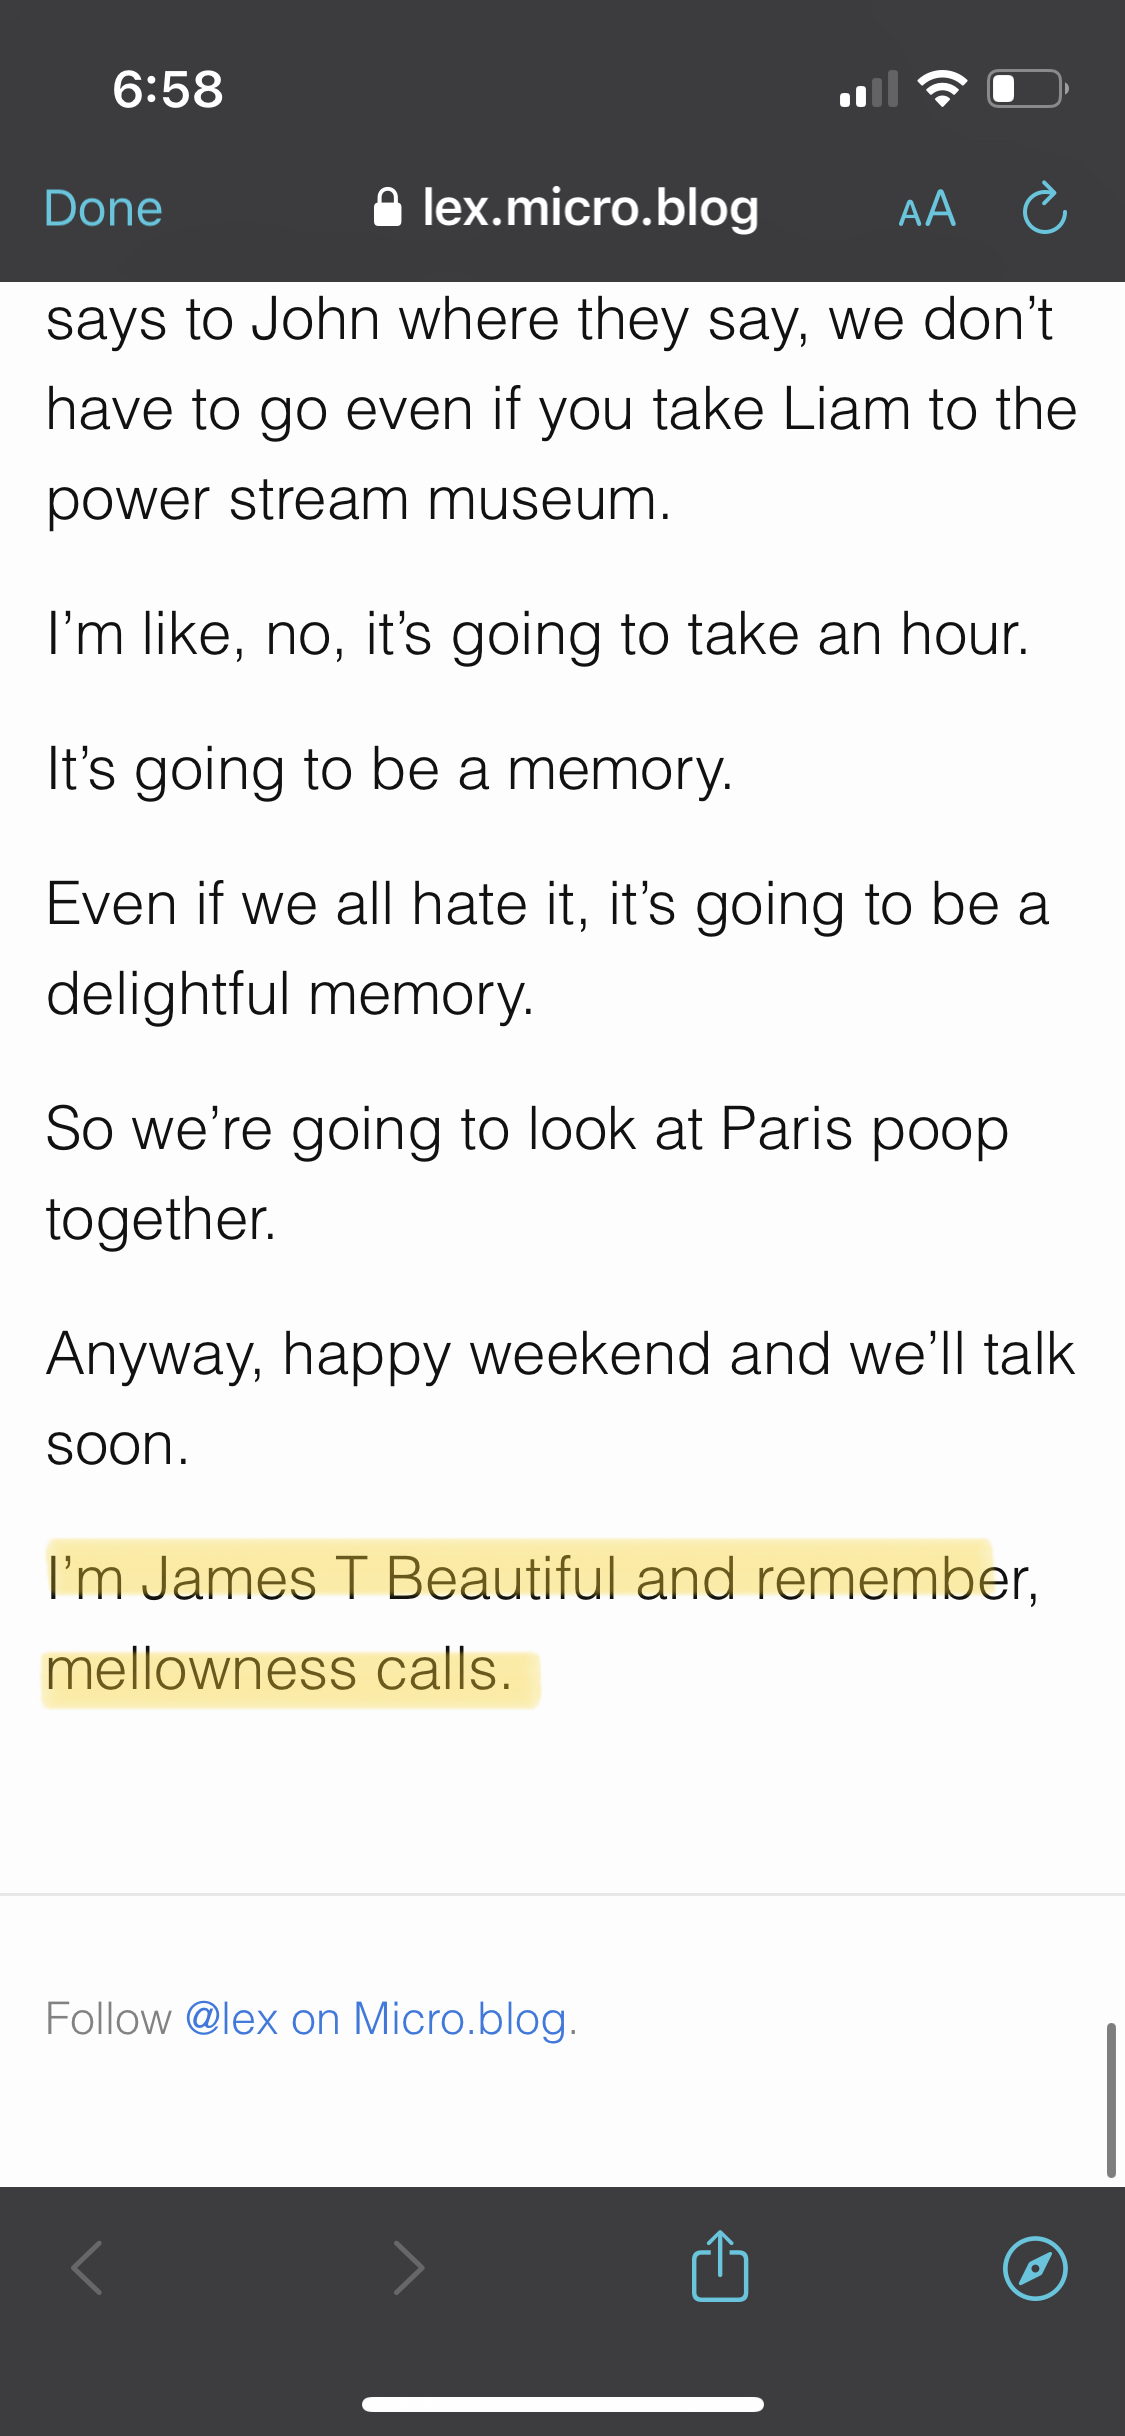 A screenshot of the transcript ending with “I'm James T Beautiful and remember, mellowness calls.”